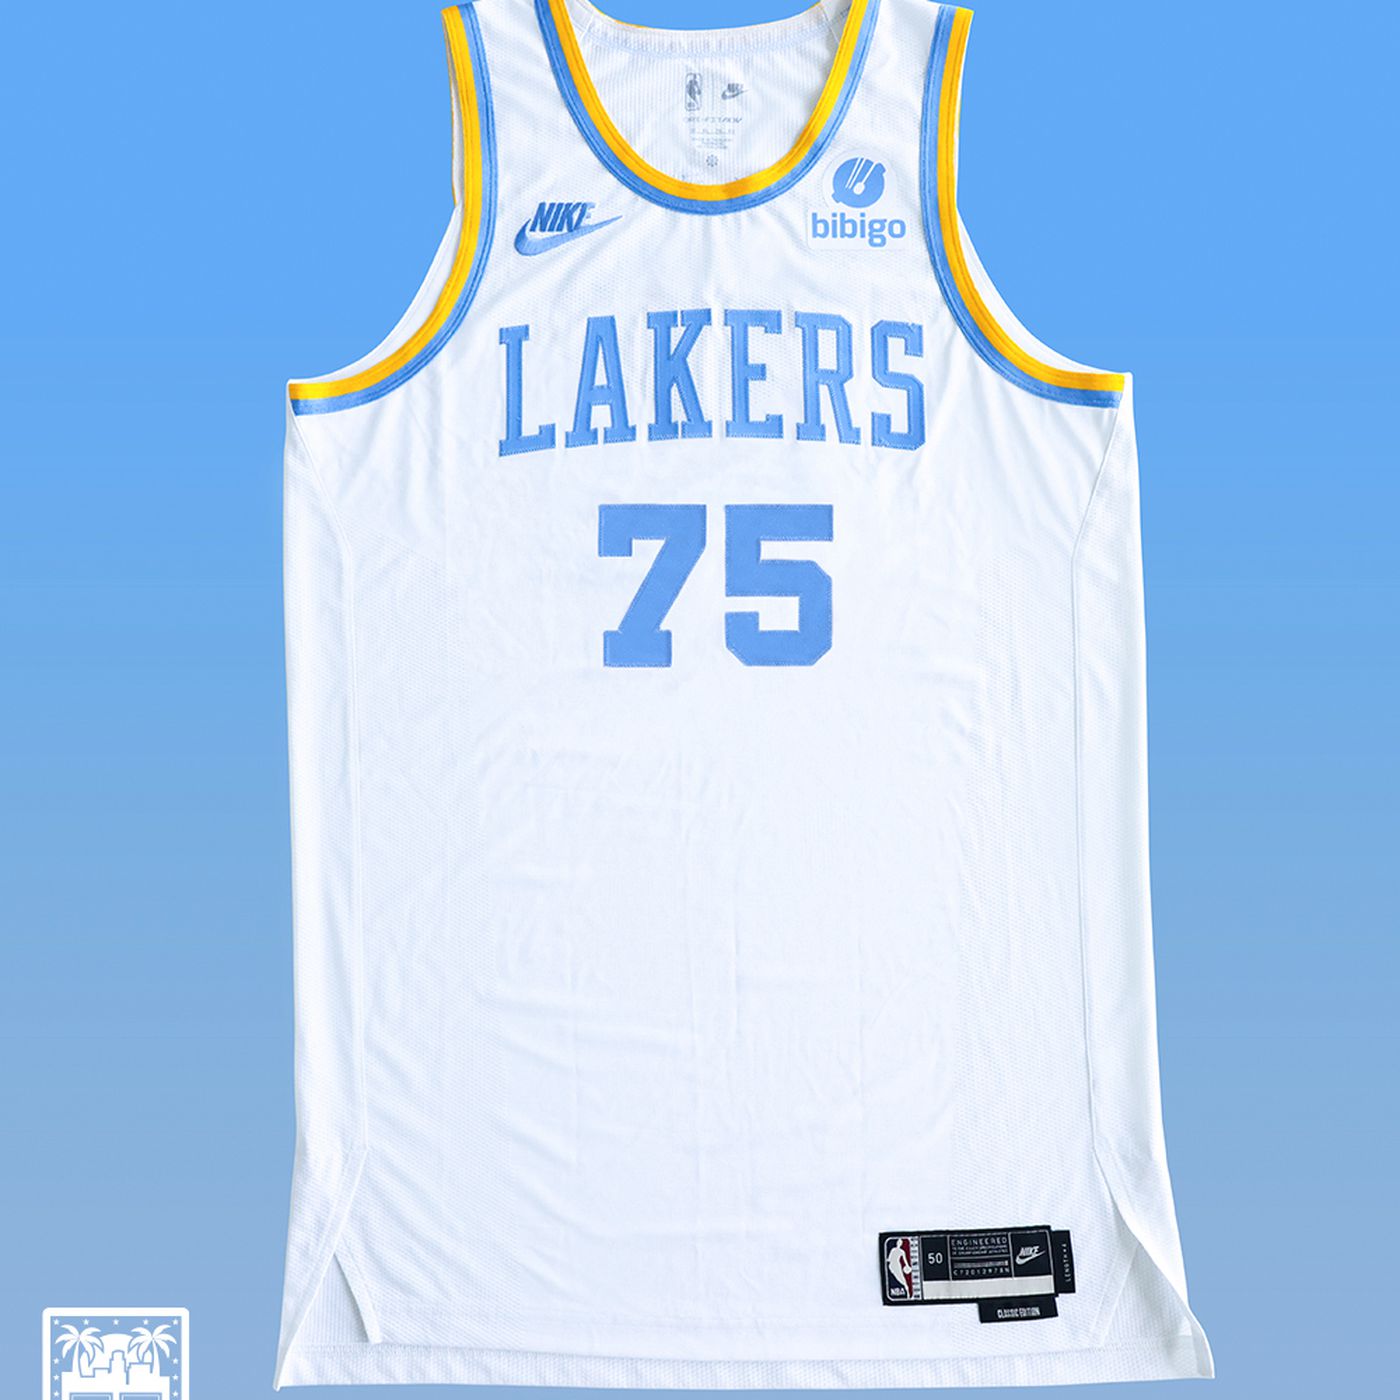 NBA Store on X: Grab the new @Lakers City Edition jersey for your